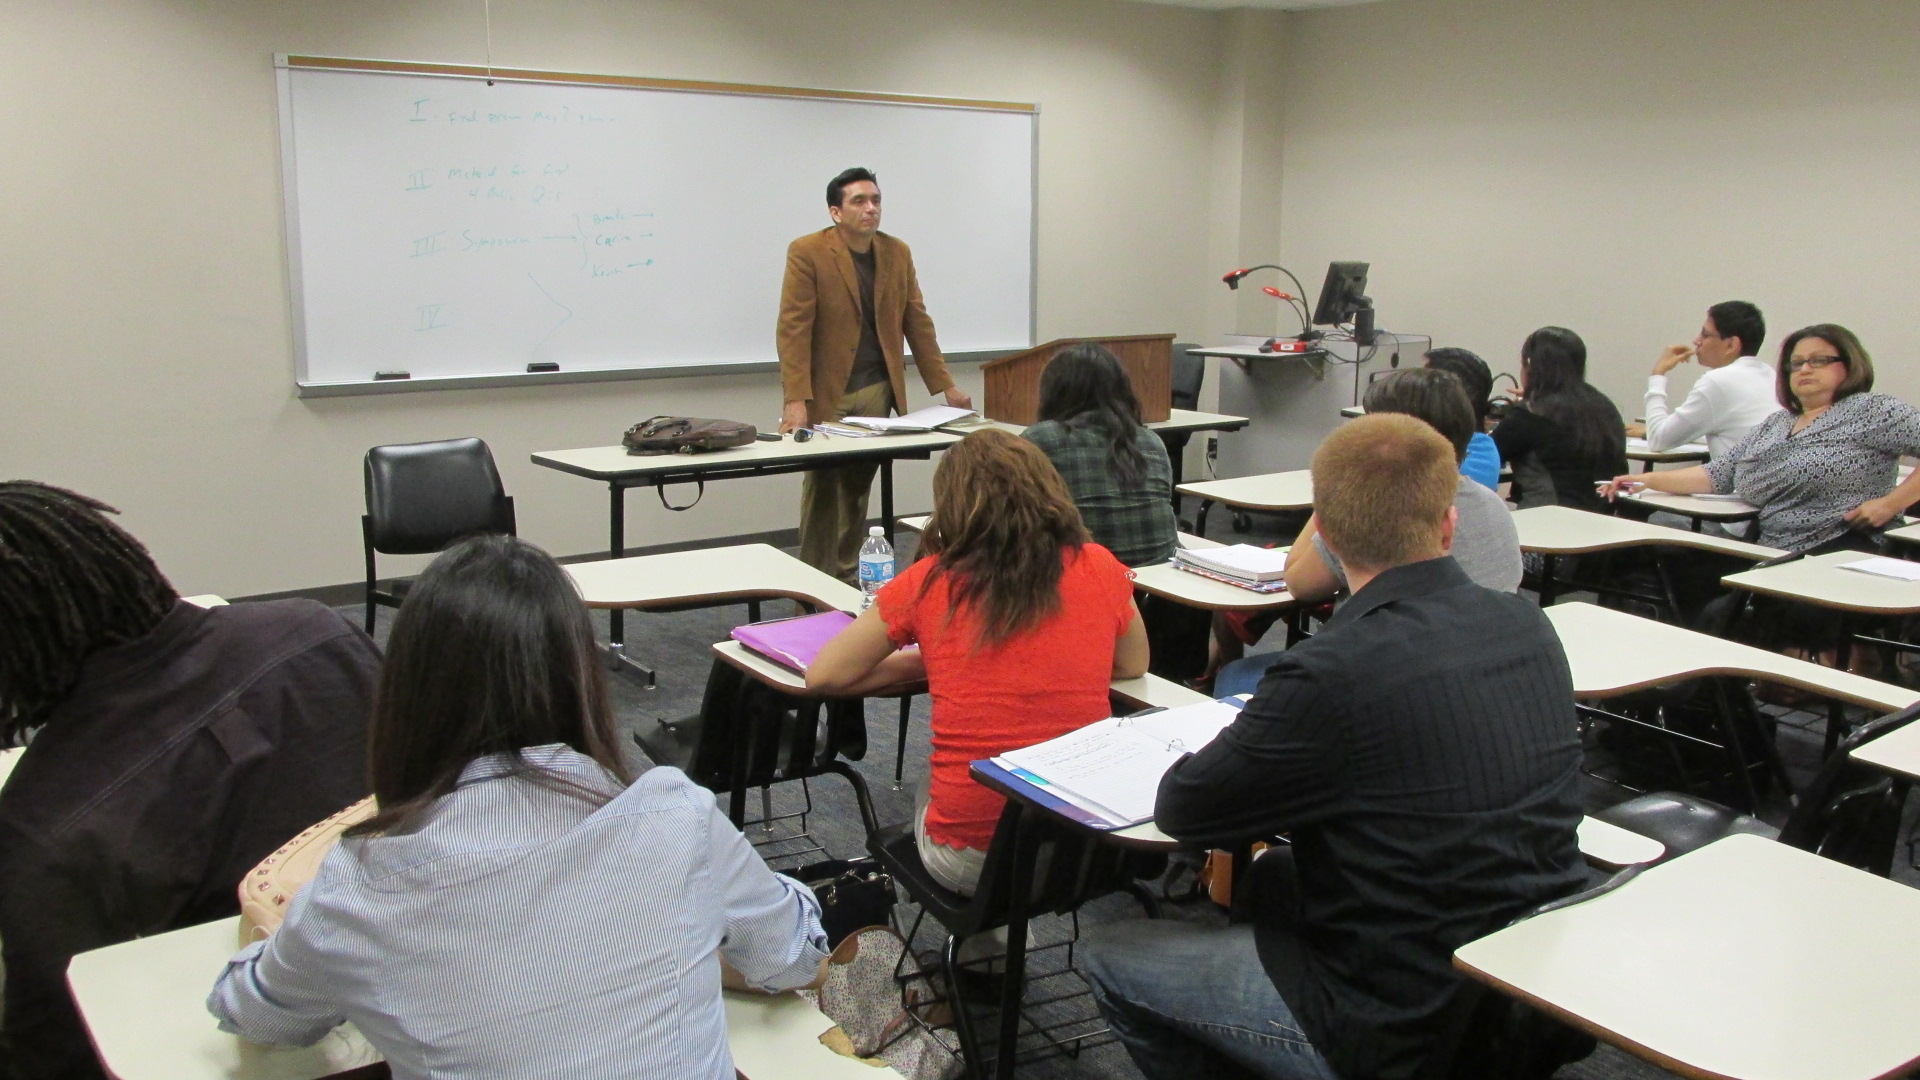 Tony Diaz, a professor at Lone Star College and also an activist with the group Librotraficante, says when students can relate more to a class, they are more engaged and do better academically. (Photo: Laura Isensee | Houston Public Media)